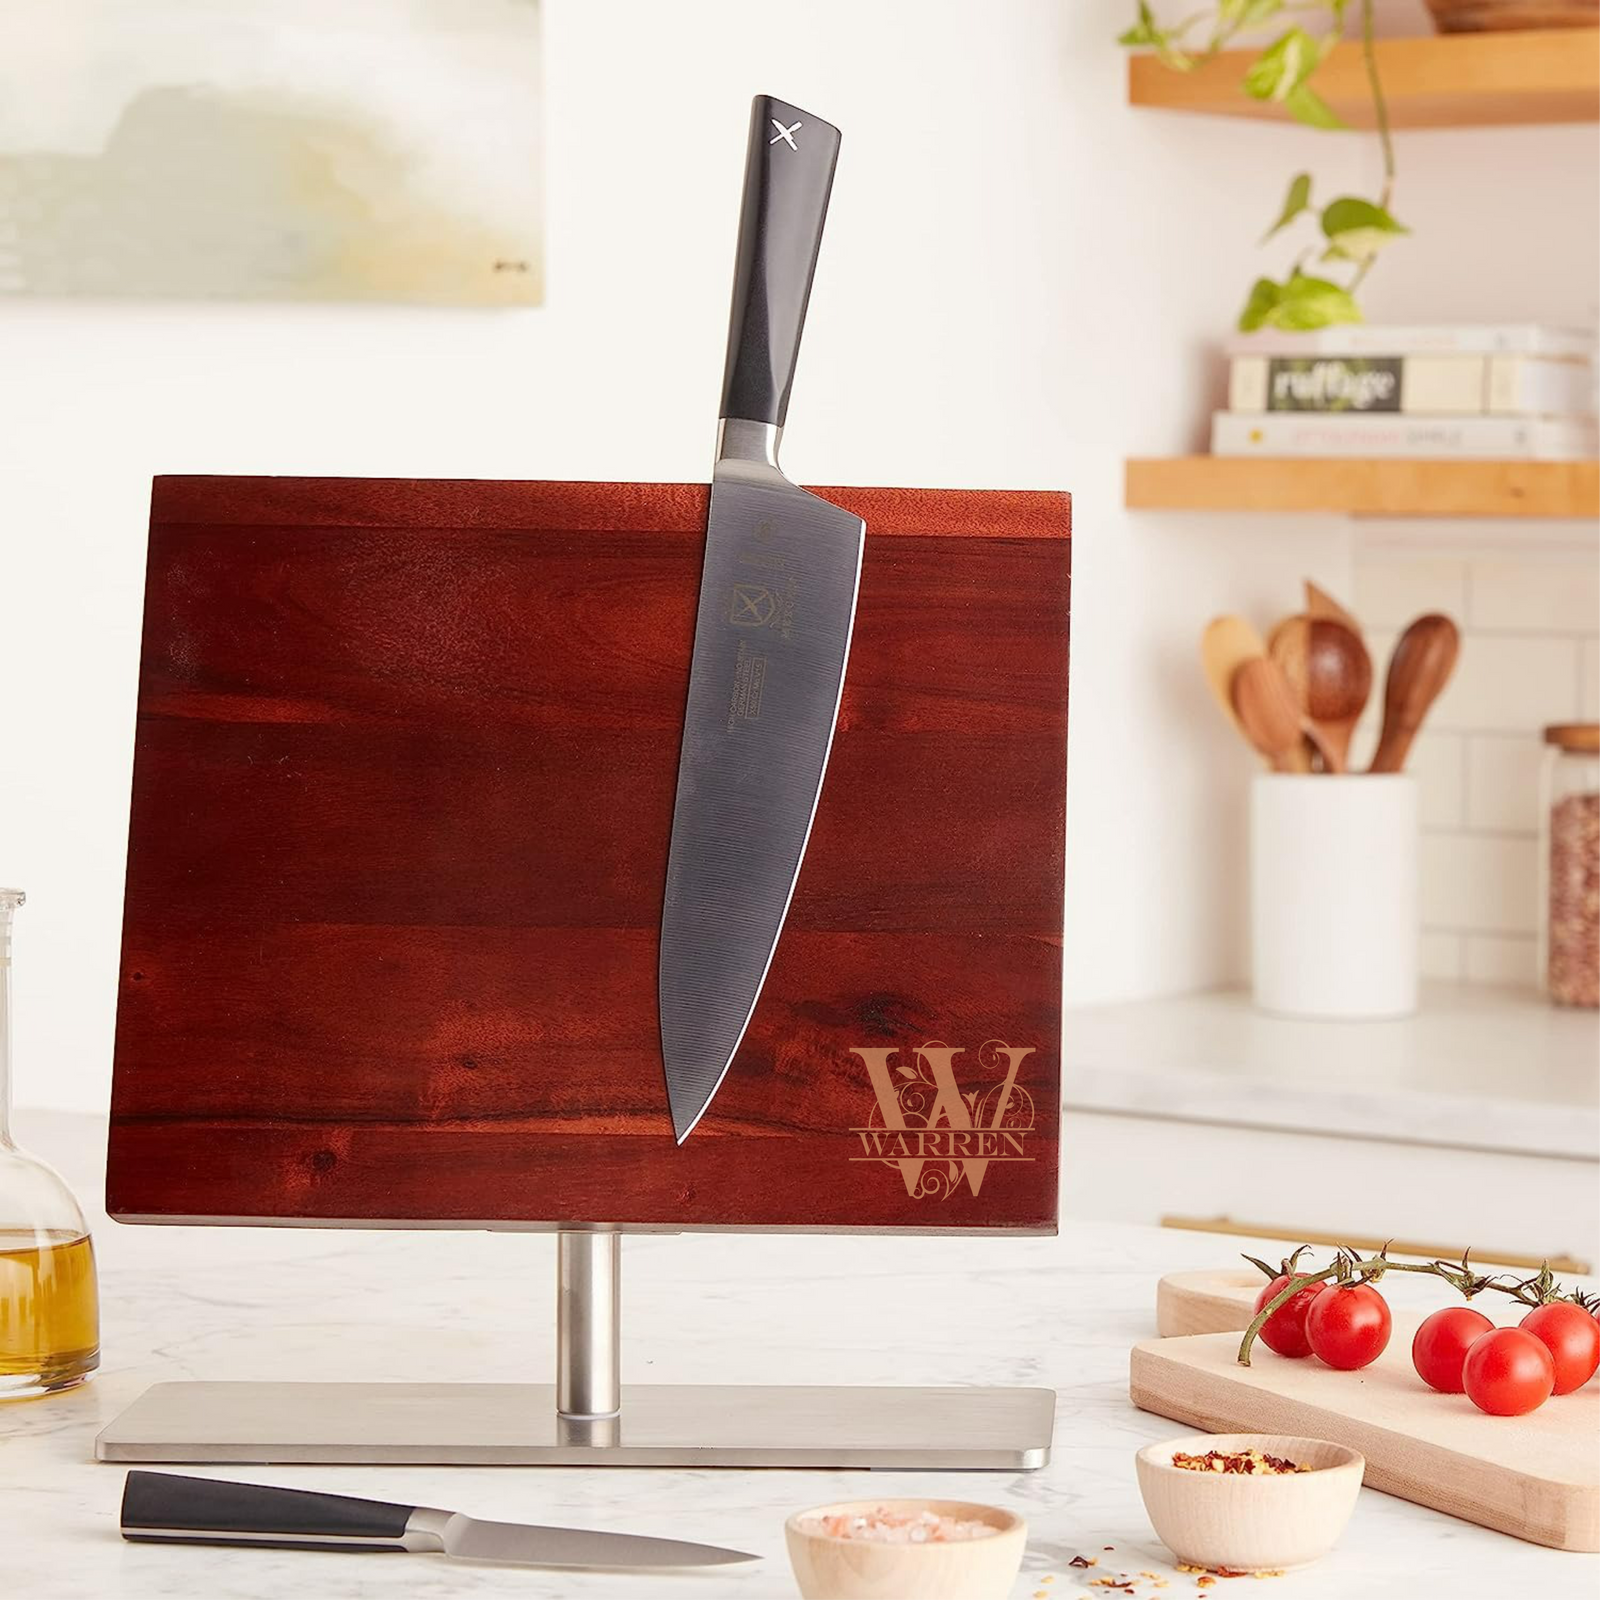 Magnetic Knife Blocks: A Stylish and Practical Kitchen Solution